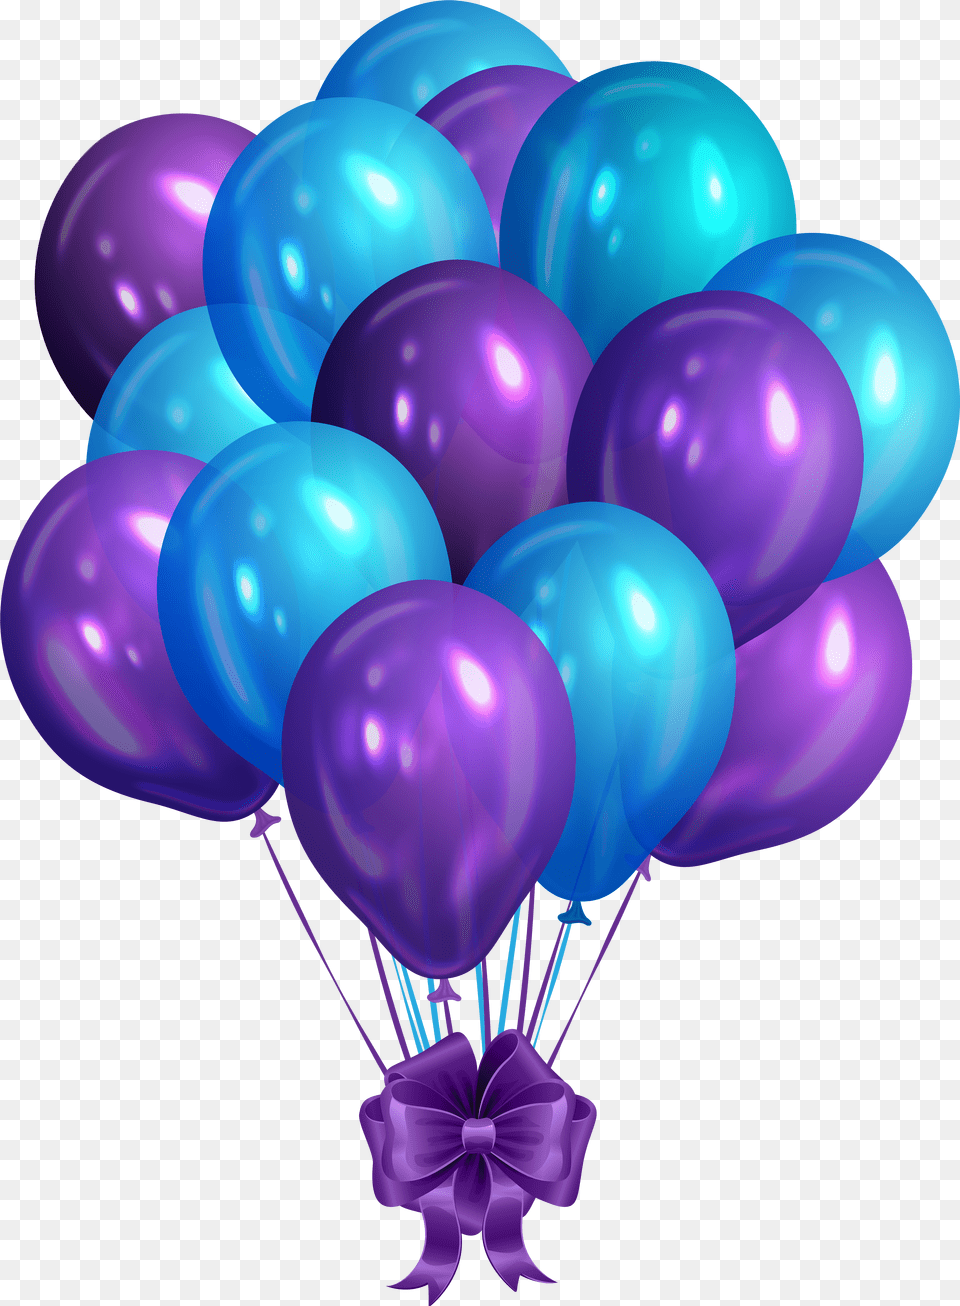 Blue Bunch Of Balloons Clip Art Blue And Purple Balloons Free Png